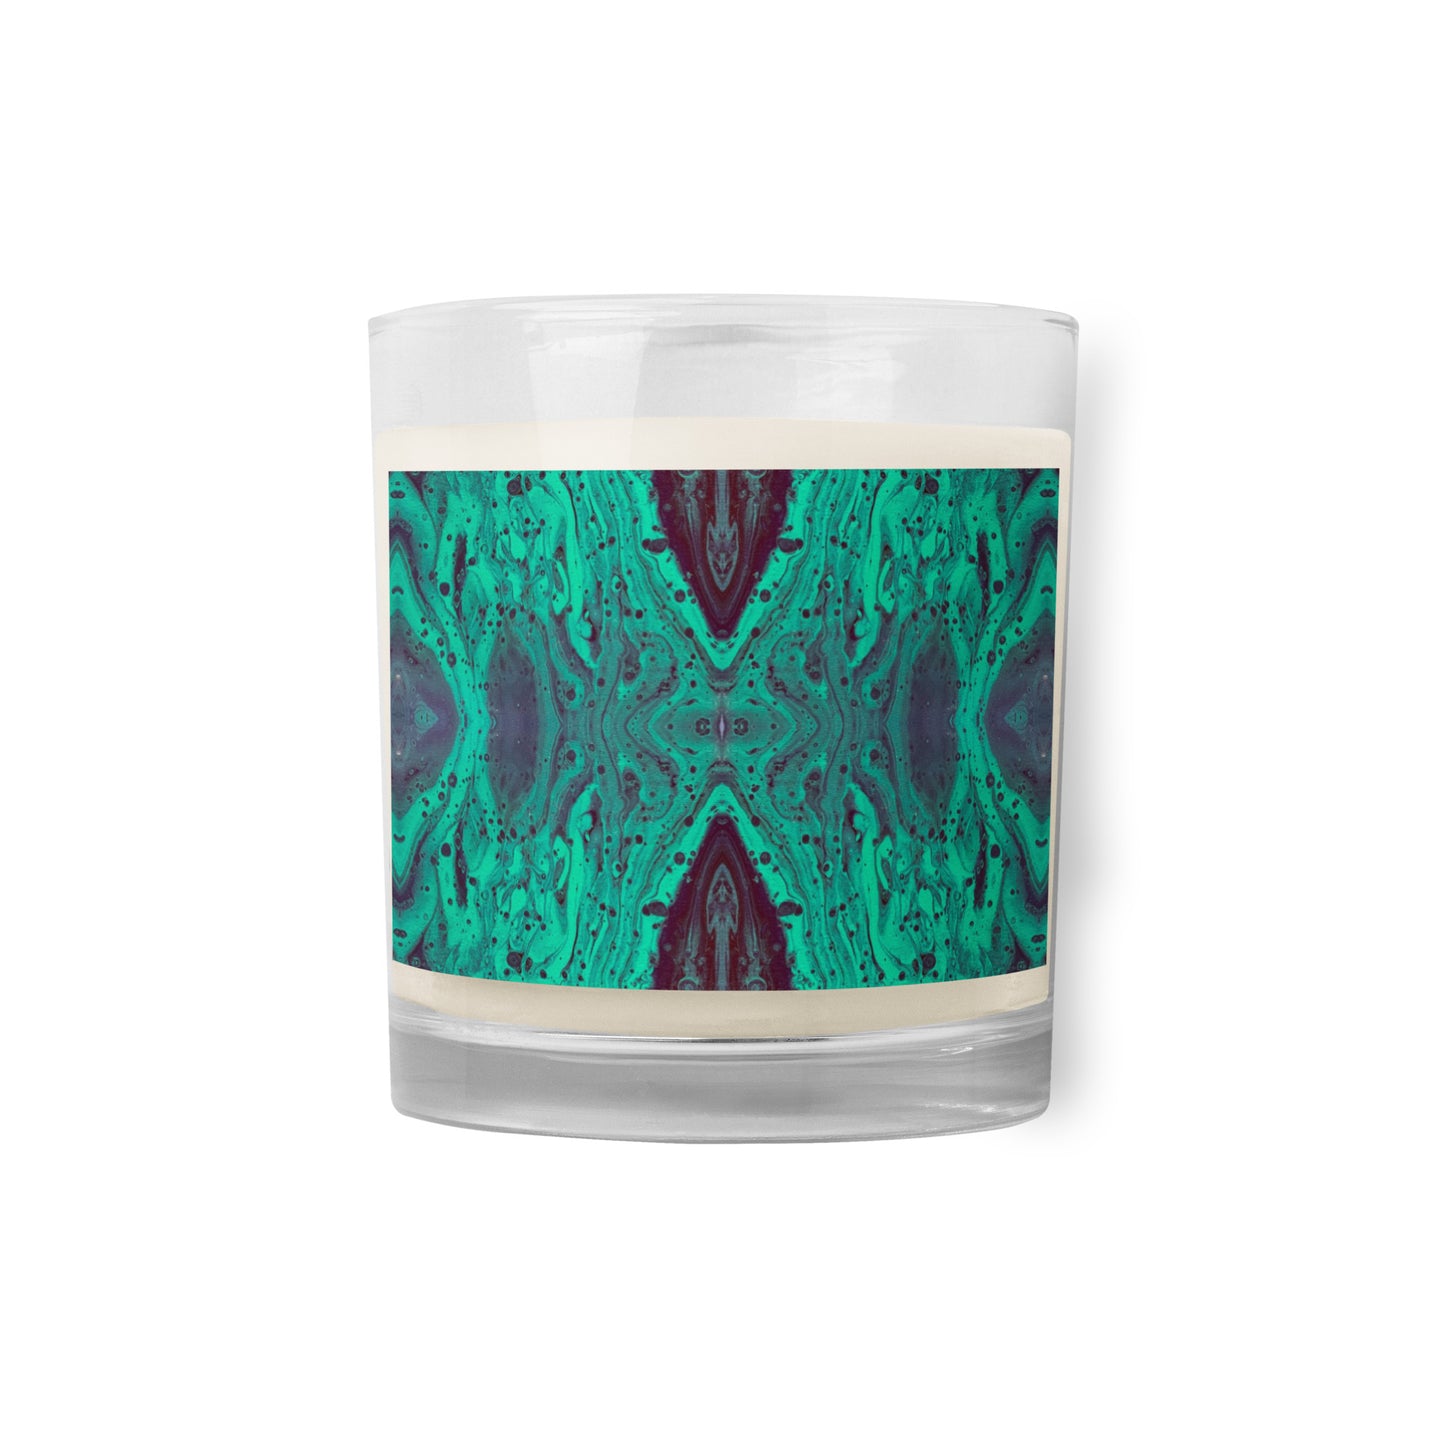 Aliens Exist Glass jar soy wax candle